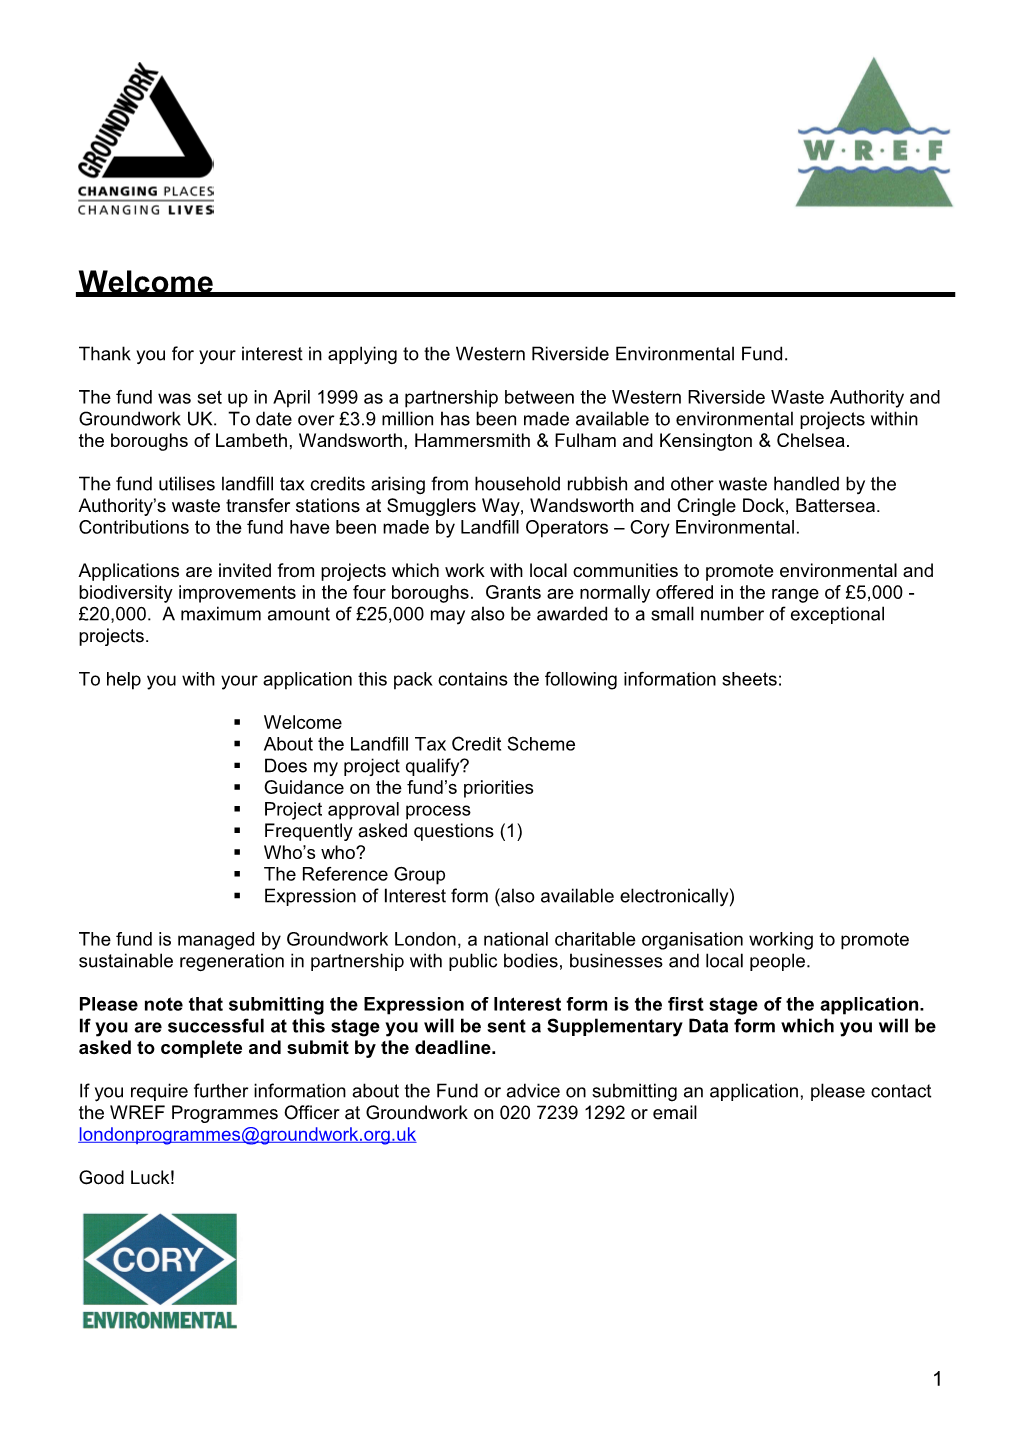 Thank You for Your Interest in Applying to the Western Riverside Environmental Fund